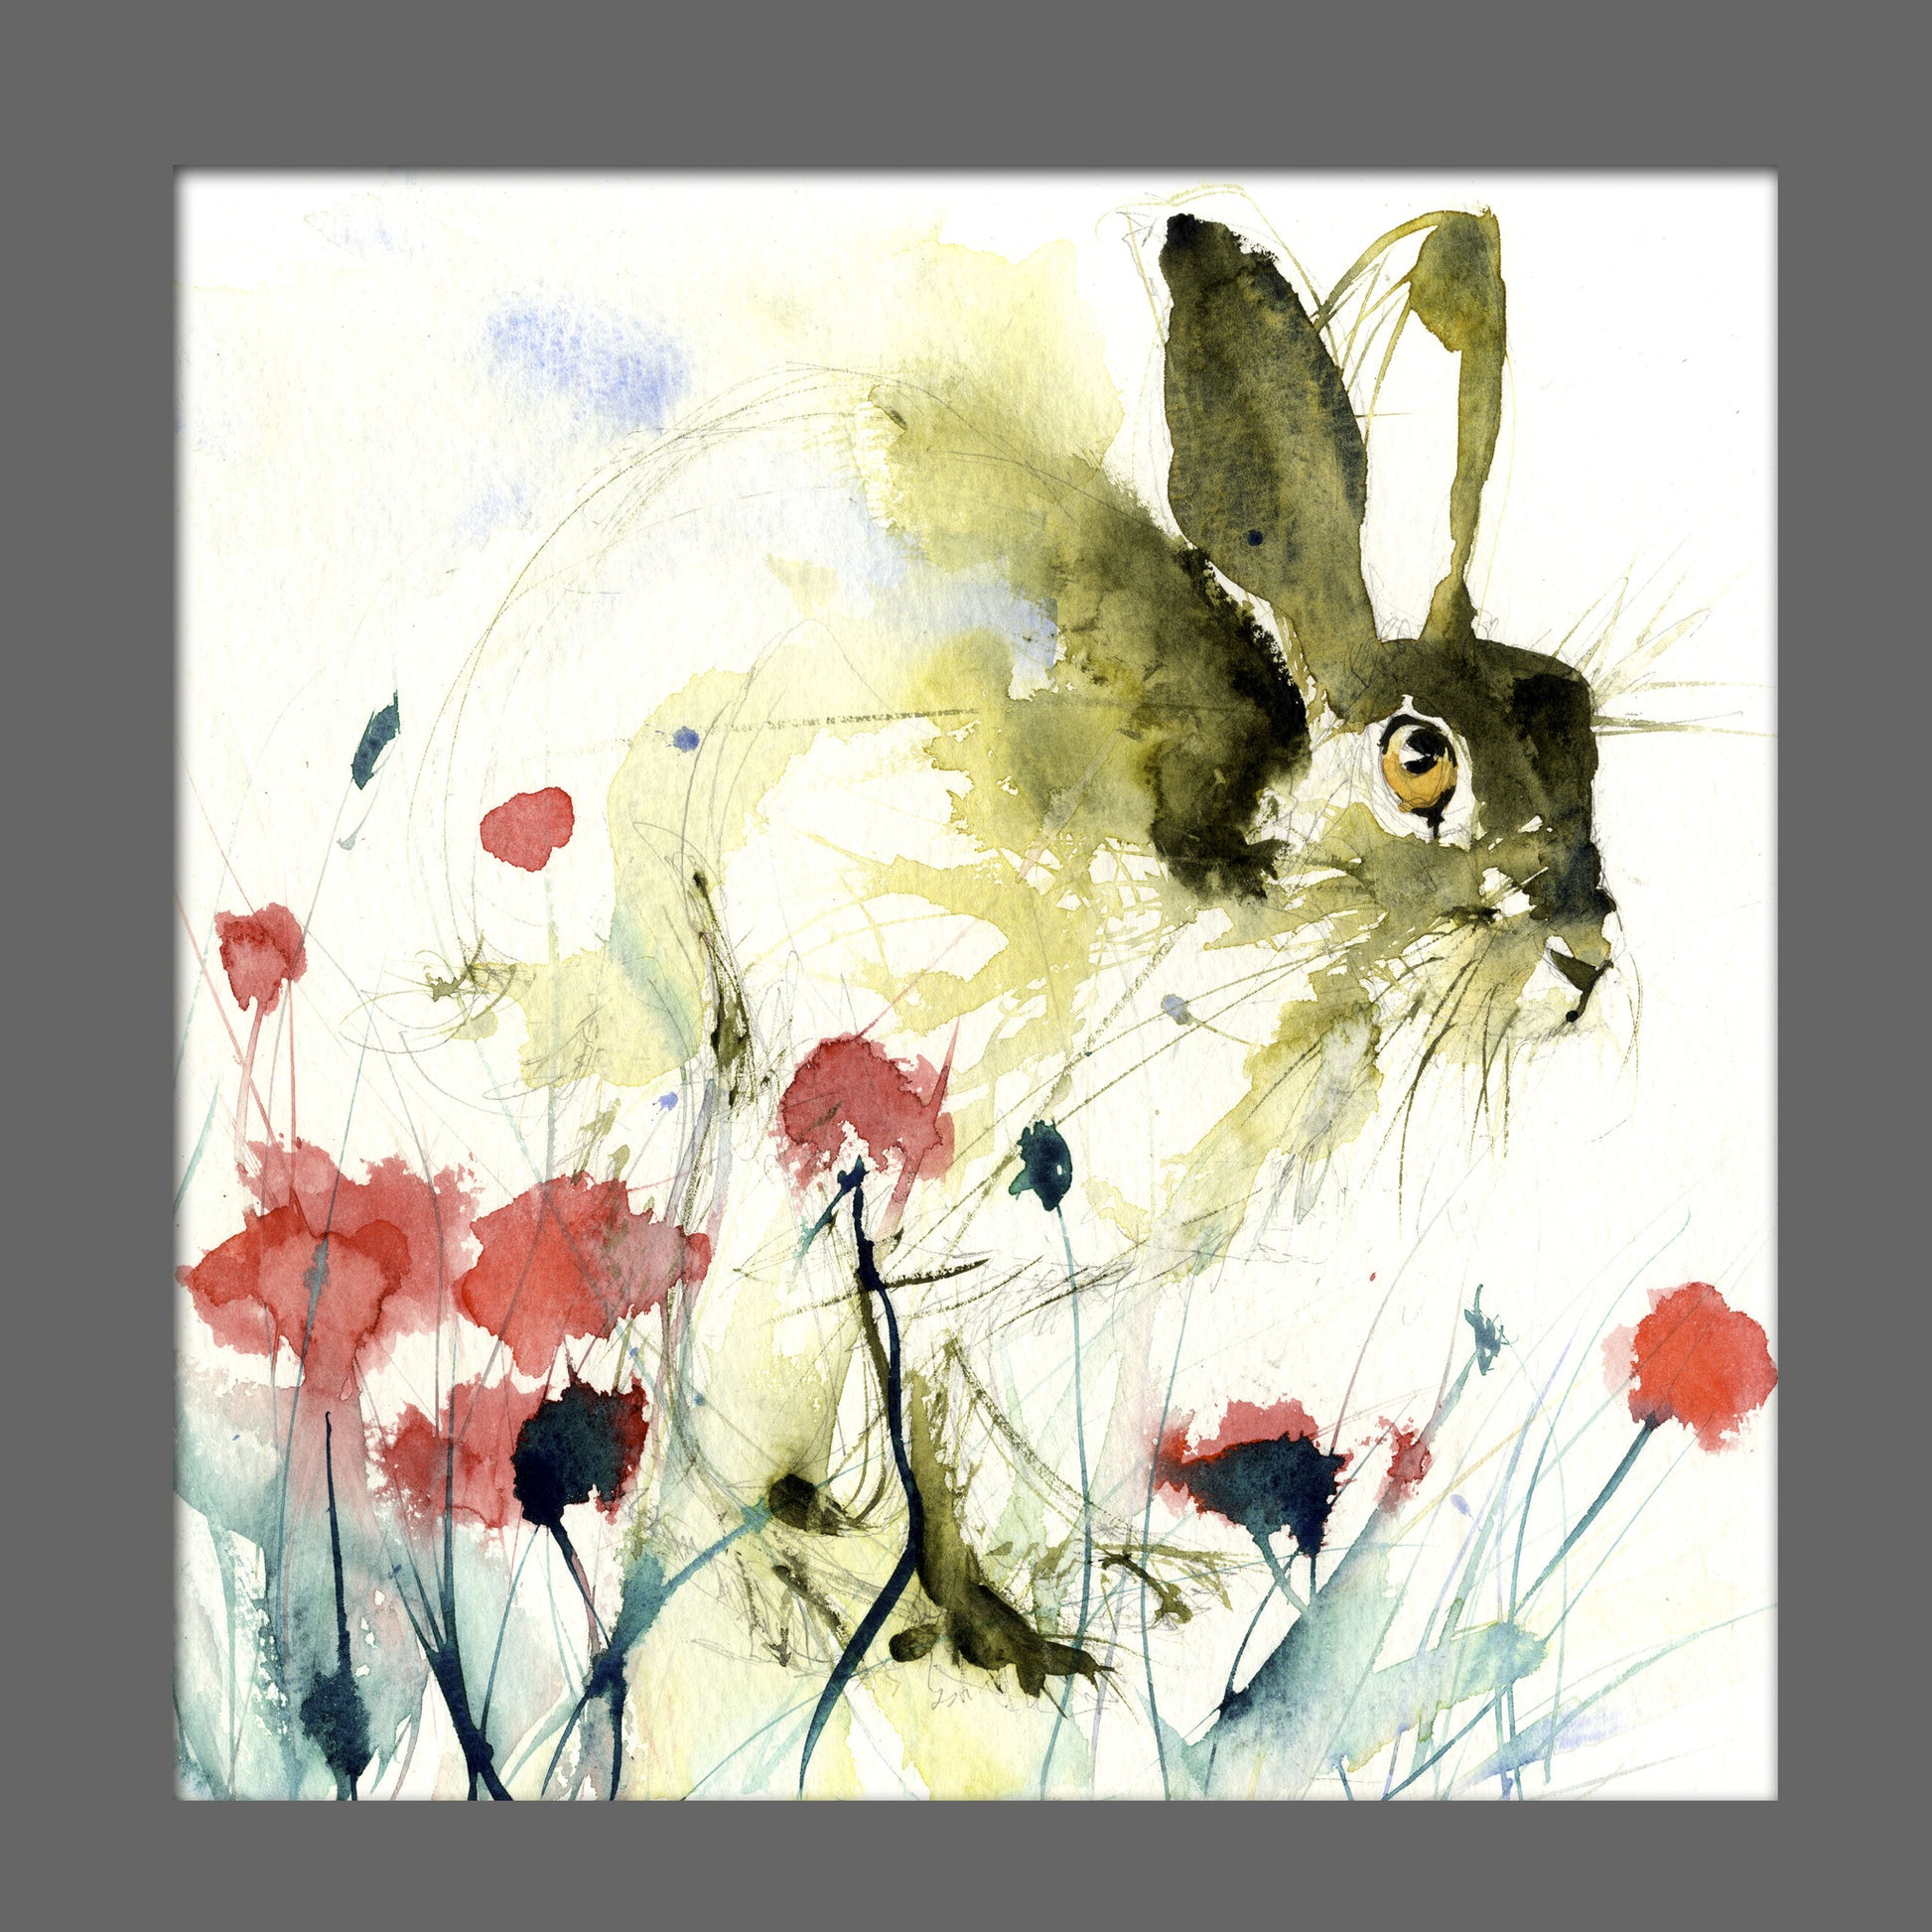 limited edition PRINT of my original HARE in a poppy field watercolour - Jen Buckley Art limited edition animal art prints